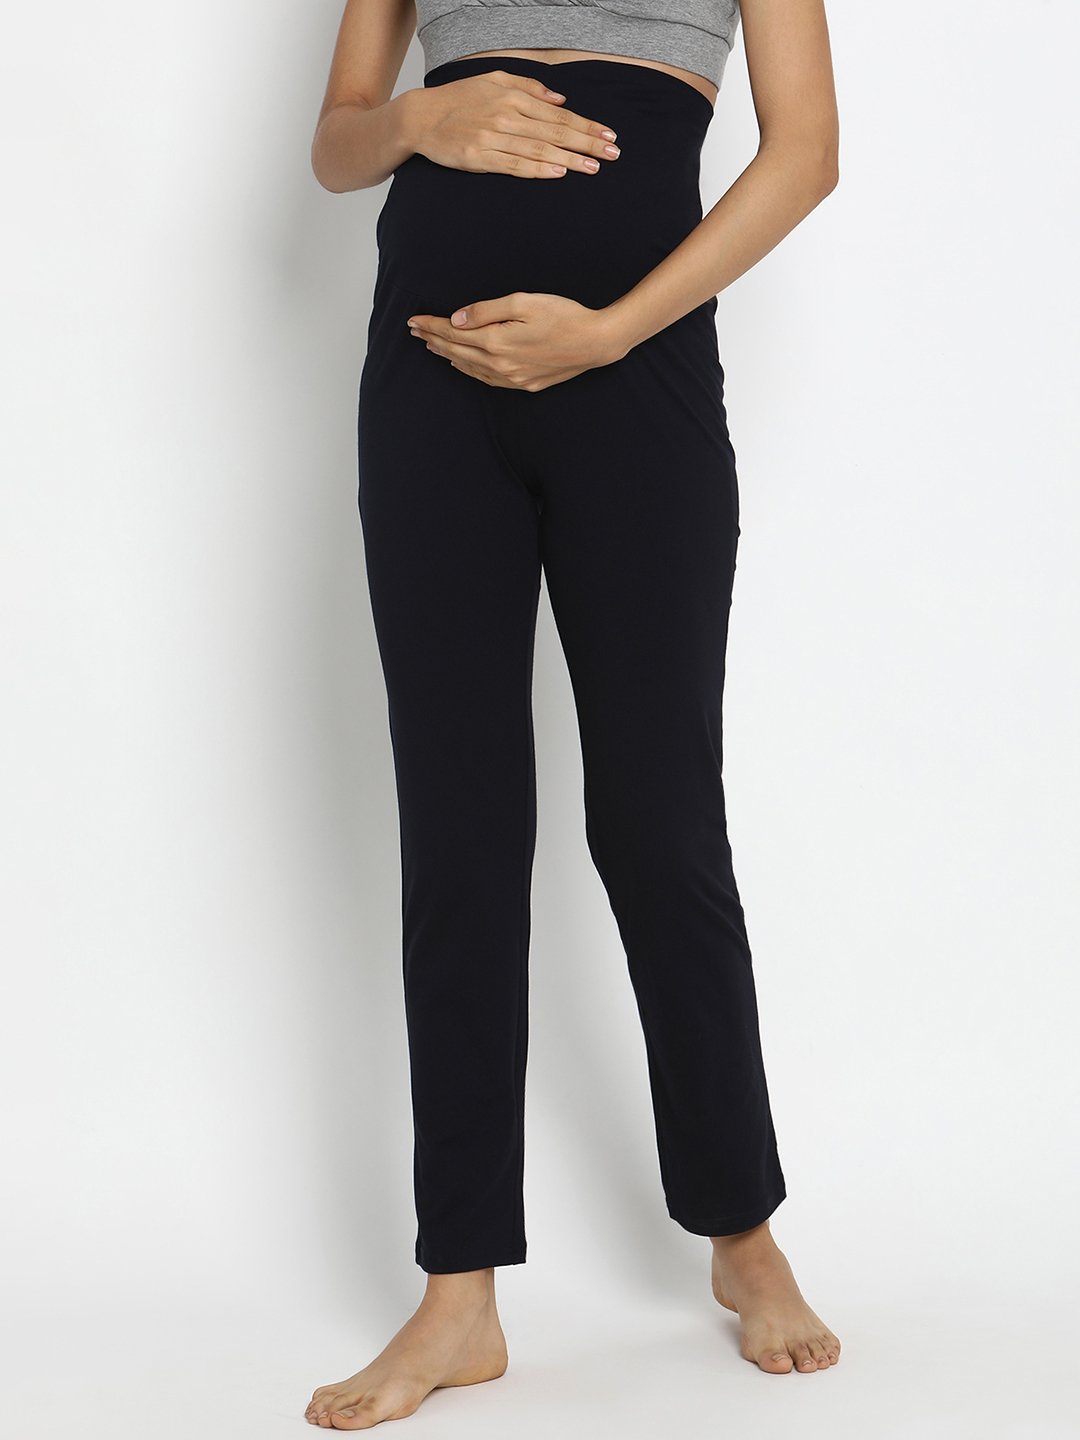 Why Wide-Leg Styles Aren't the Best Choice for Maternity Dress Pants –  MARION Maternity